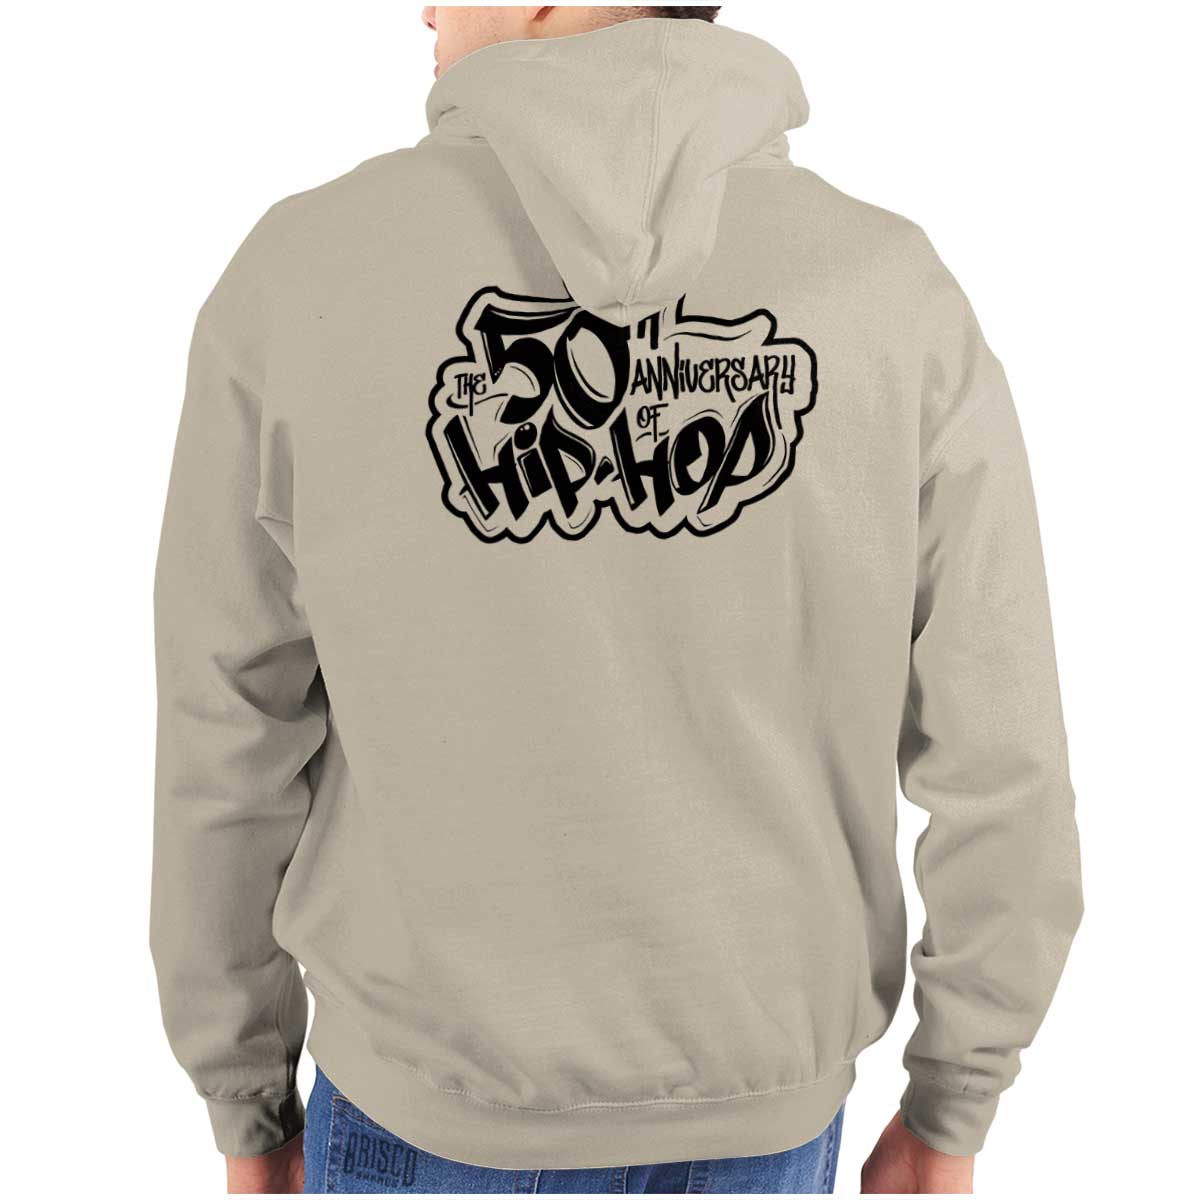 This image shows a sweatshirt that honors the birthplace of Hip Hop and the iconic moment when DJ Kool Herc brought music to life in 1973, allowing you to celebrate and proudly wear a piece of history.